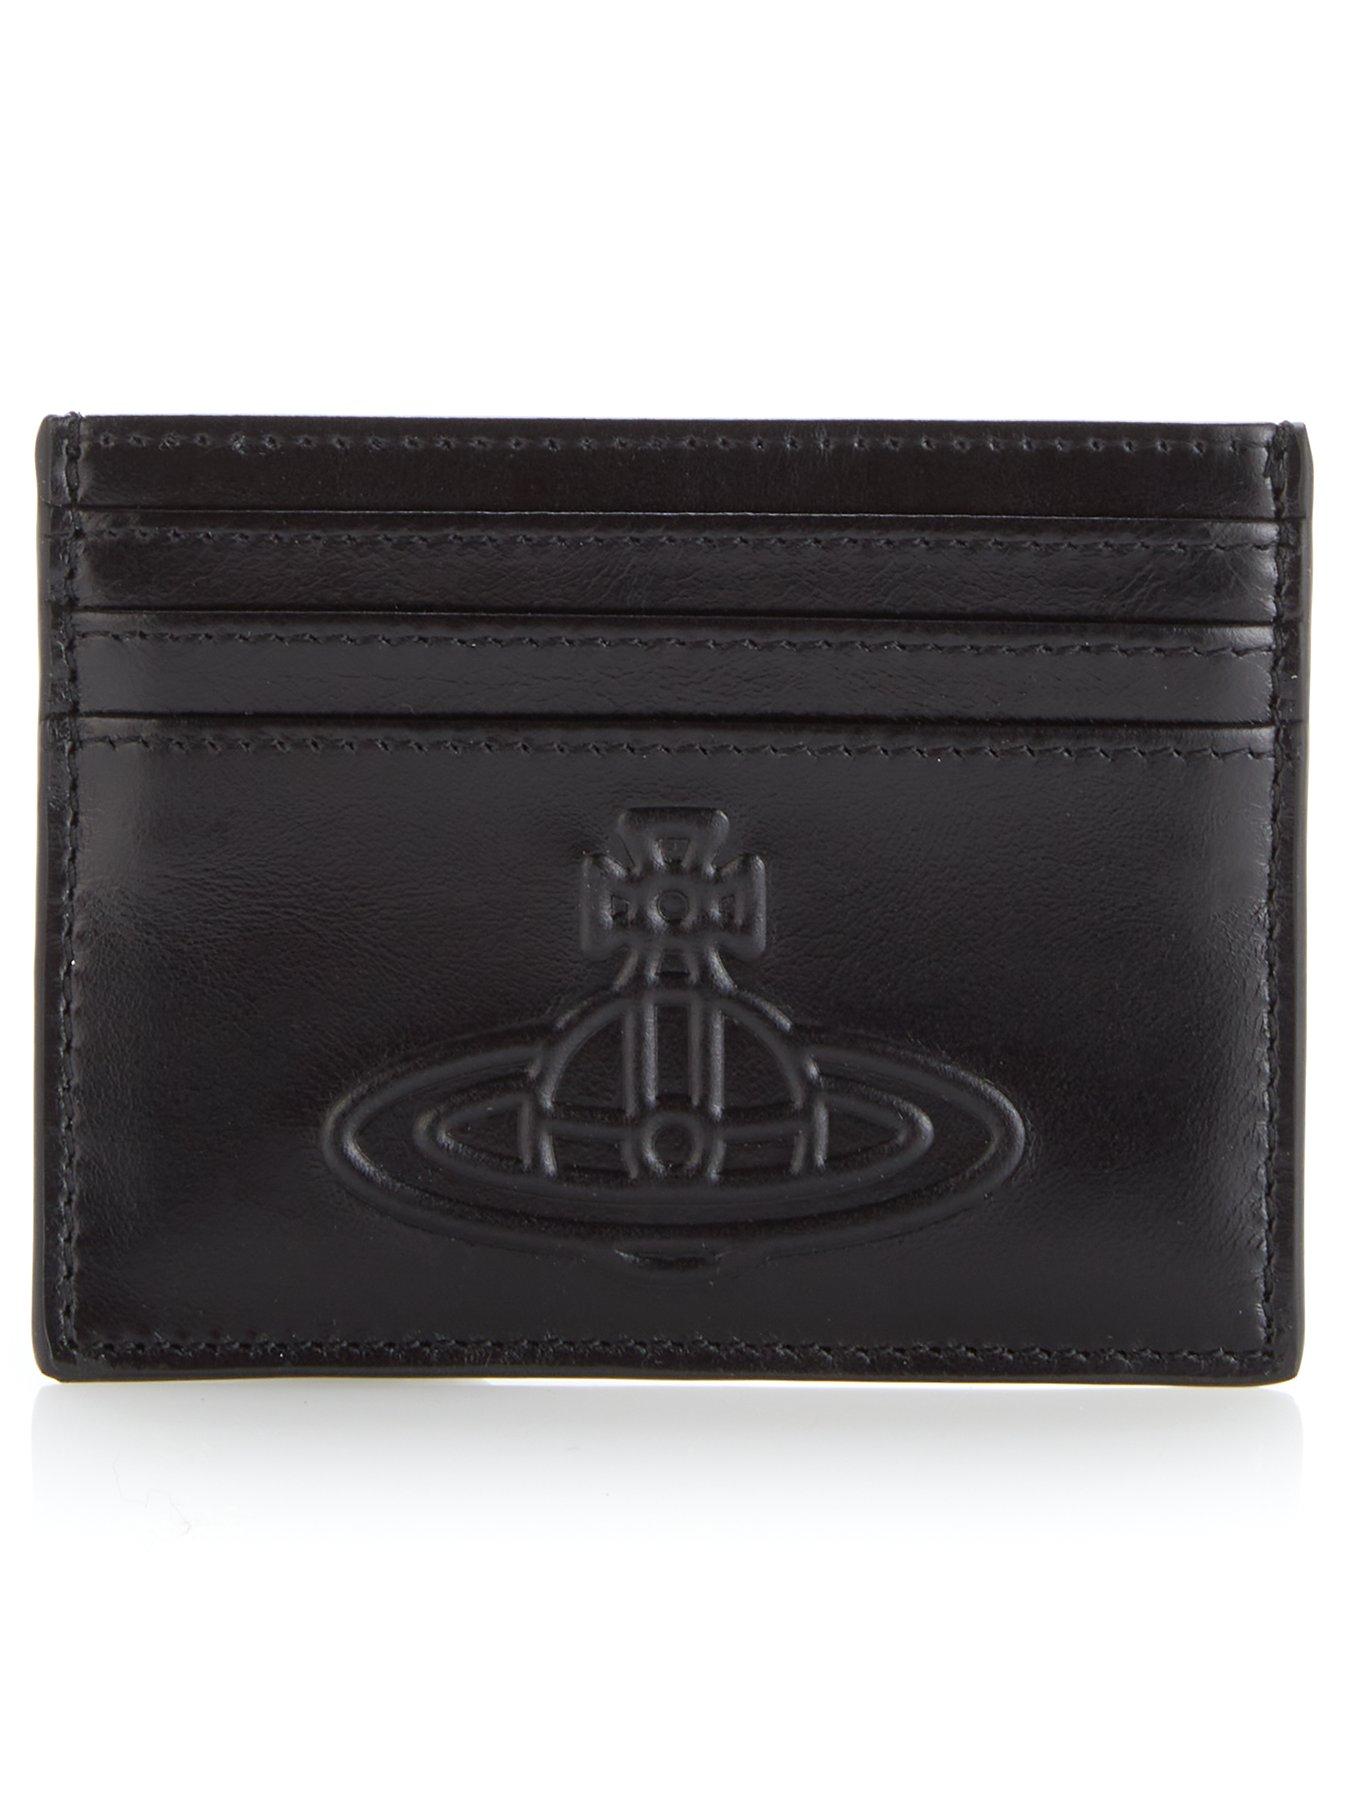 Womens Mens Accessories Mens Wallets and cardholders Vivienne Westwood Black Logo Leather Wallet 